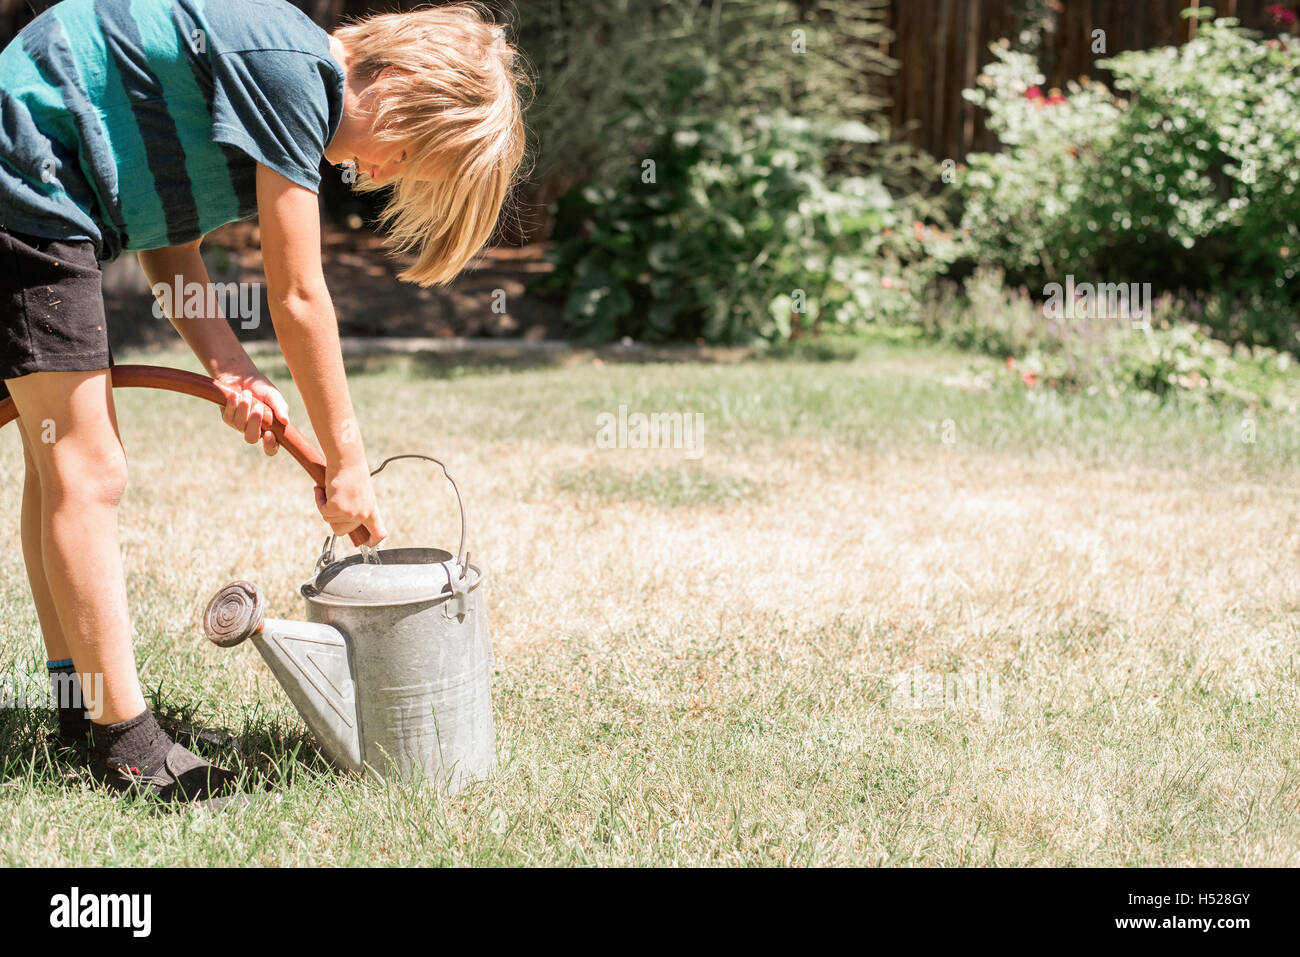 Blond boy in a garden, filling a watering can from a garden hose. Stock Photo